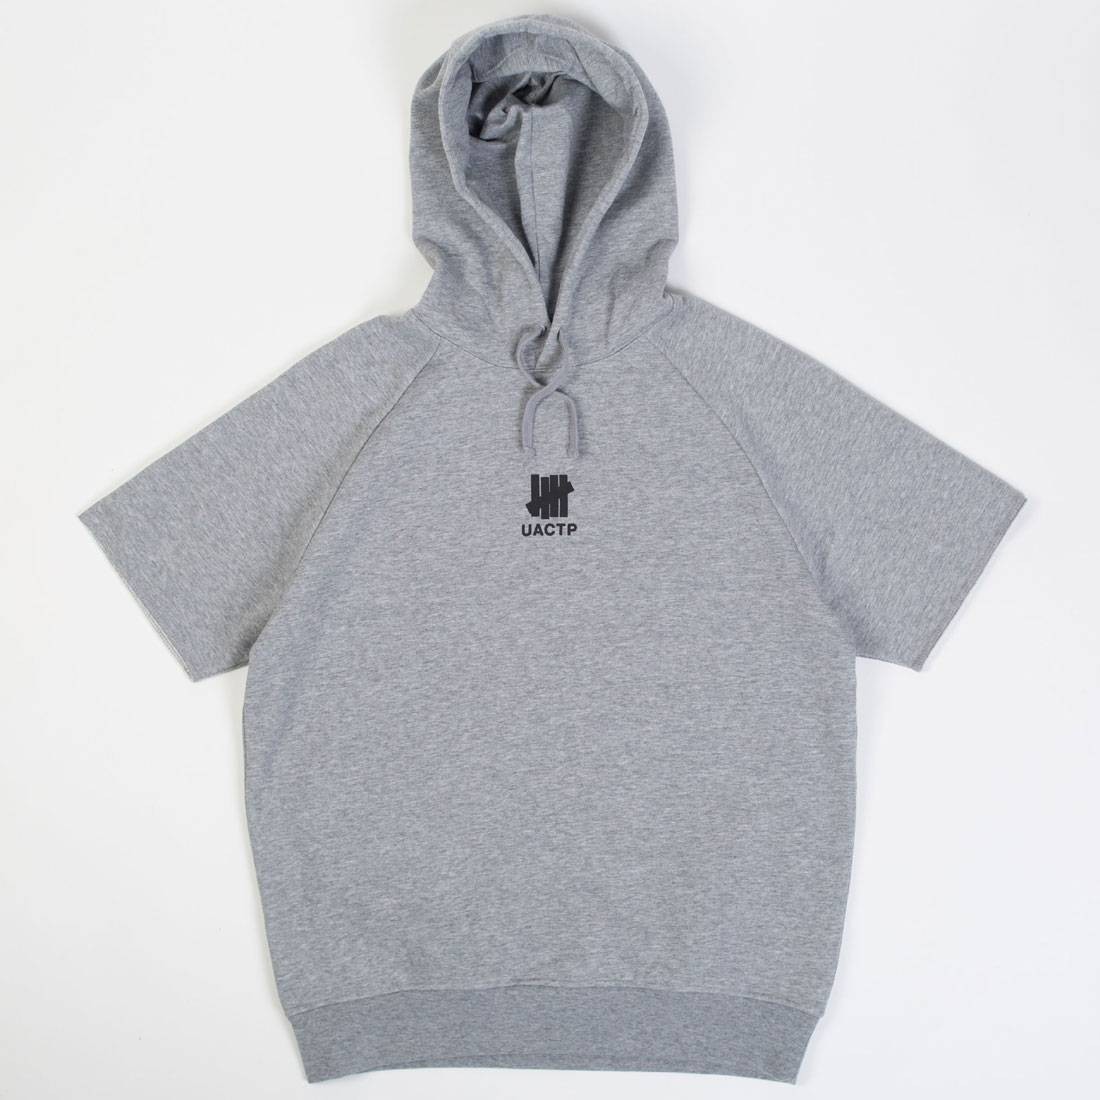 Undefeated Men UACTP Short Sleeve Pullover Hoody (gray / heather)